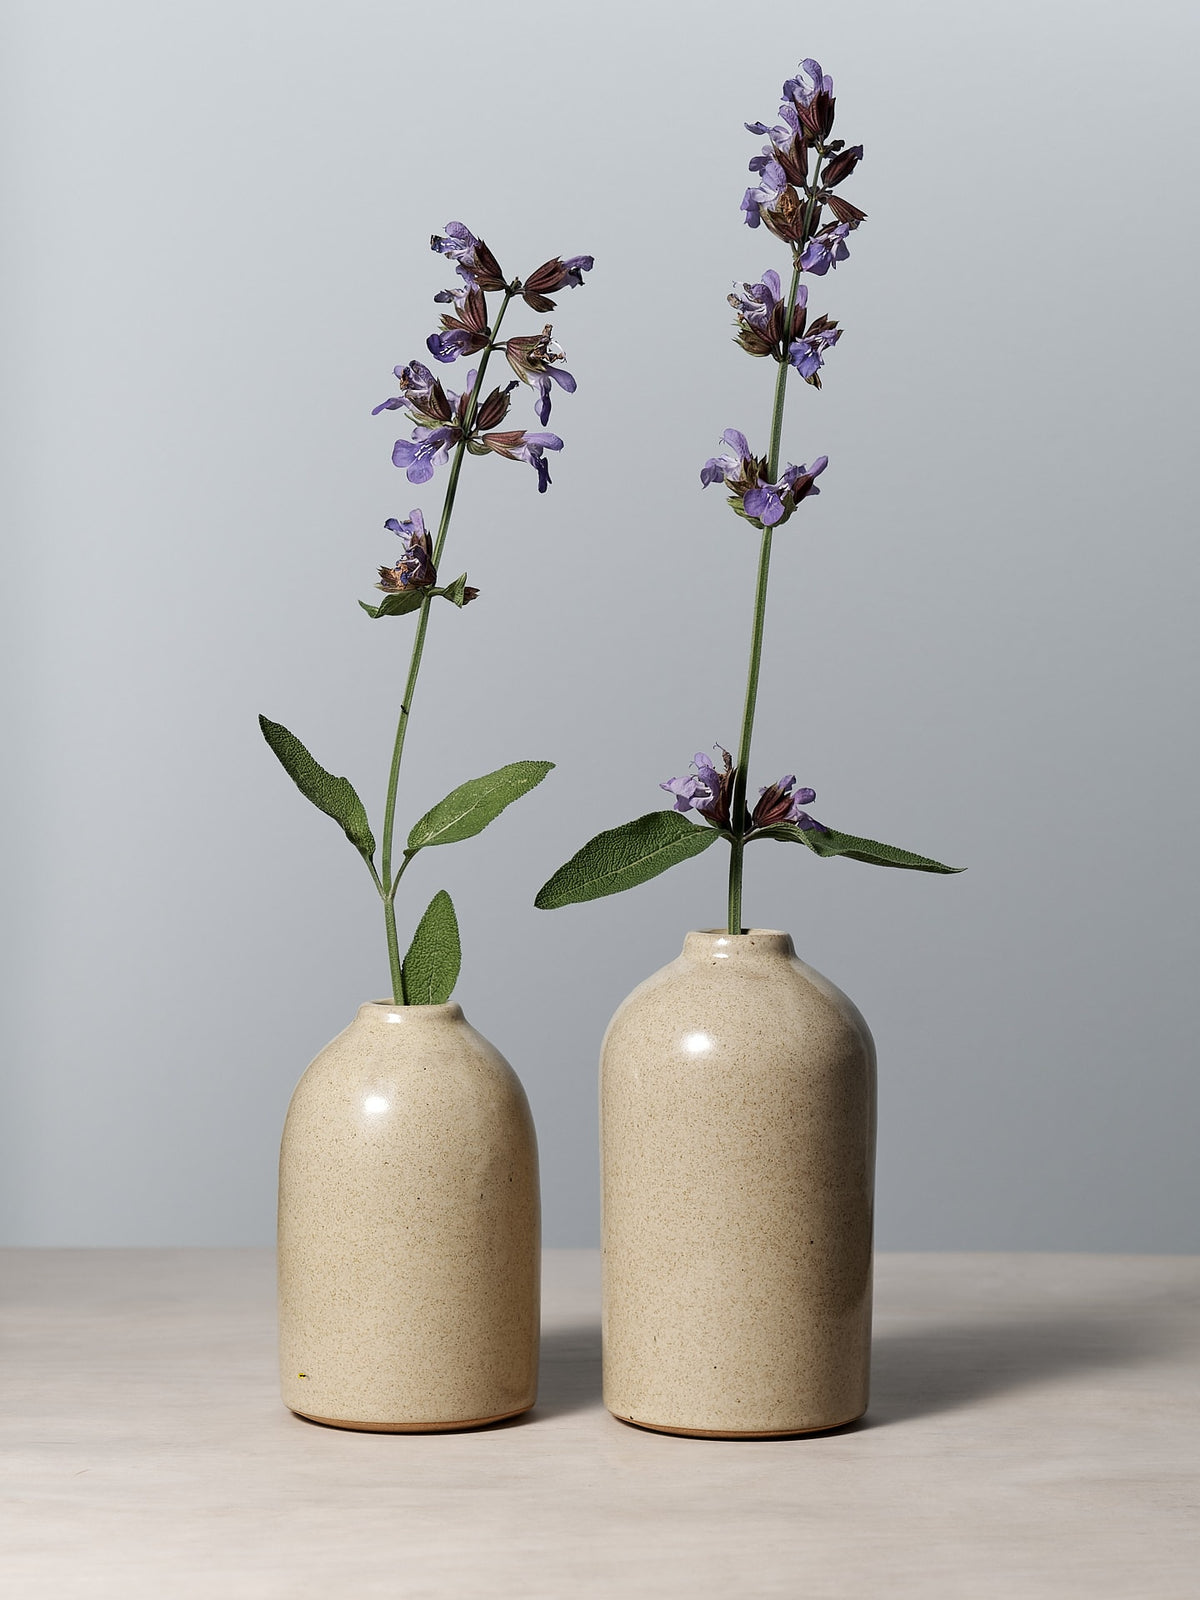 Two Richard Beauchamp Medium Bud Vases on a table with purple flowers in them.